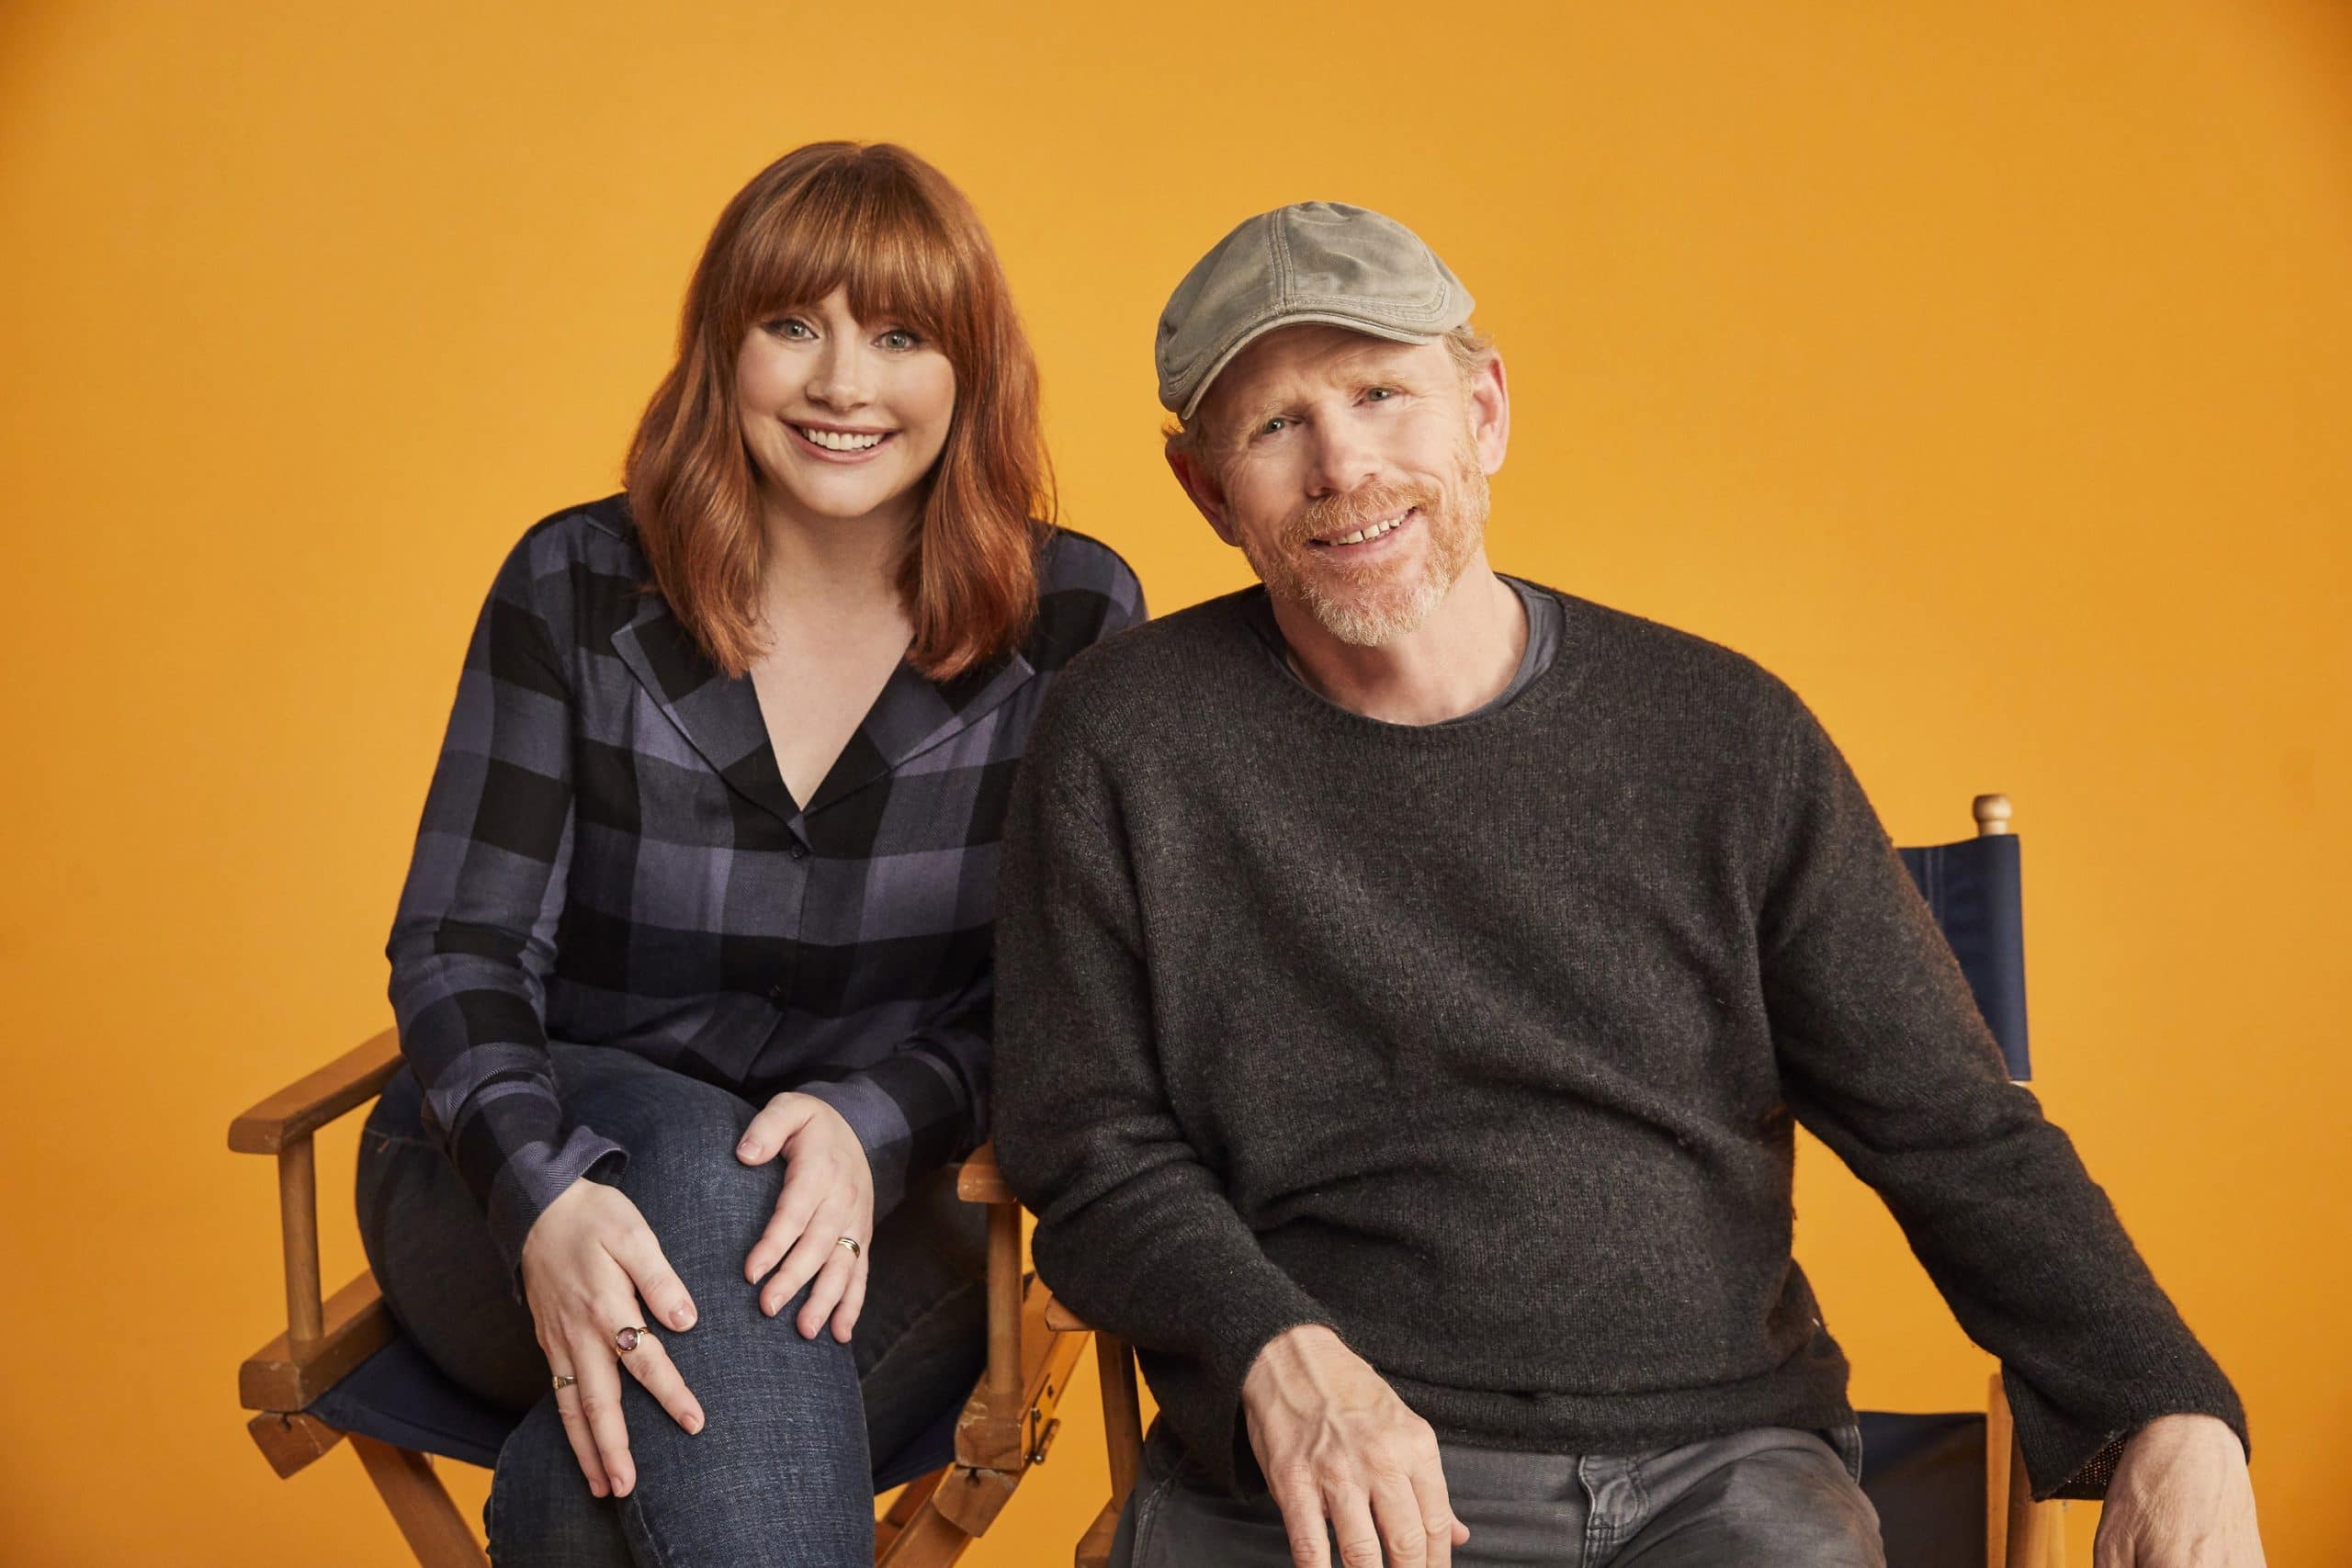 DADS, from left: director Bryce Dallas Howard, producer Ron Howard, on set, 2019